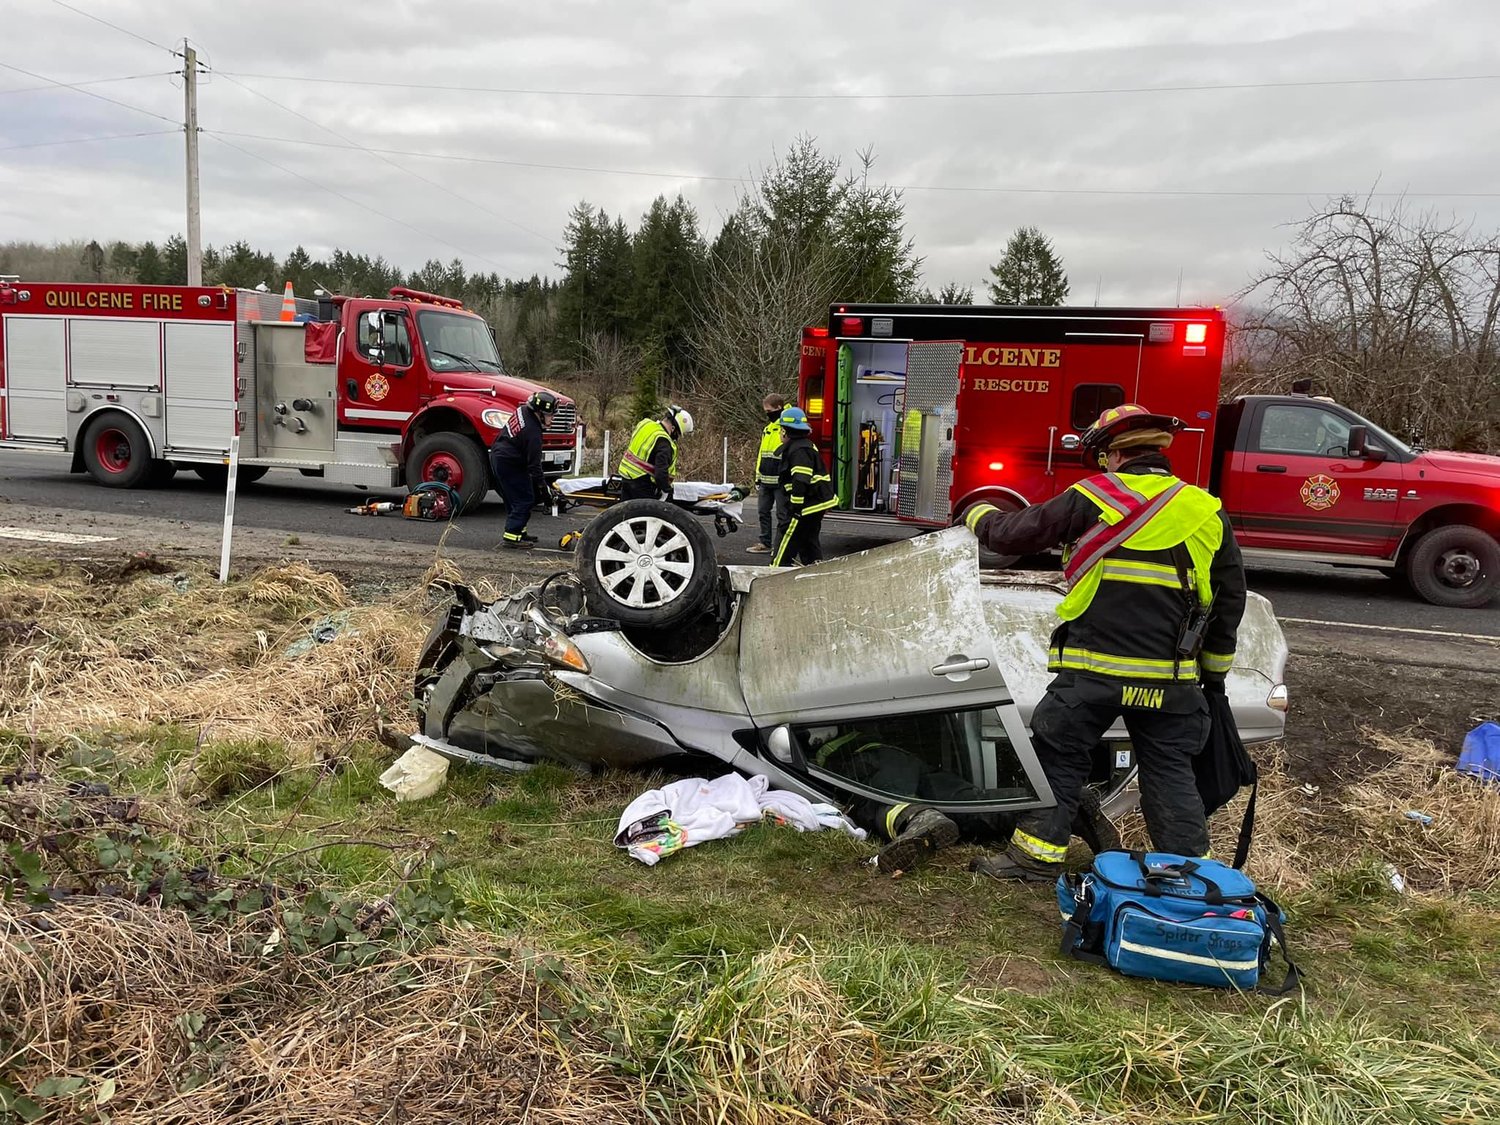 Quilcene Fire Rescue was one of multiple agencies that responded to a two-car crash Monday, Feb. 3. Two medevac flights were ordered, and long traffic delays were projected.